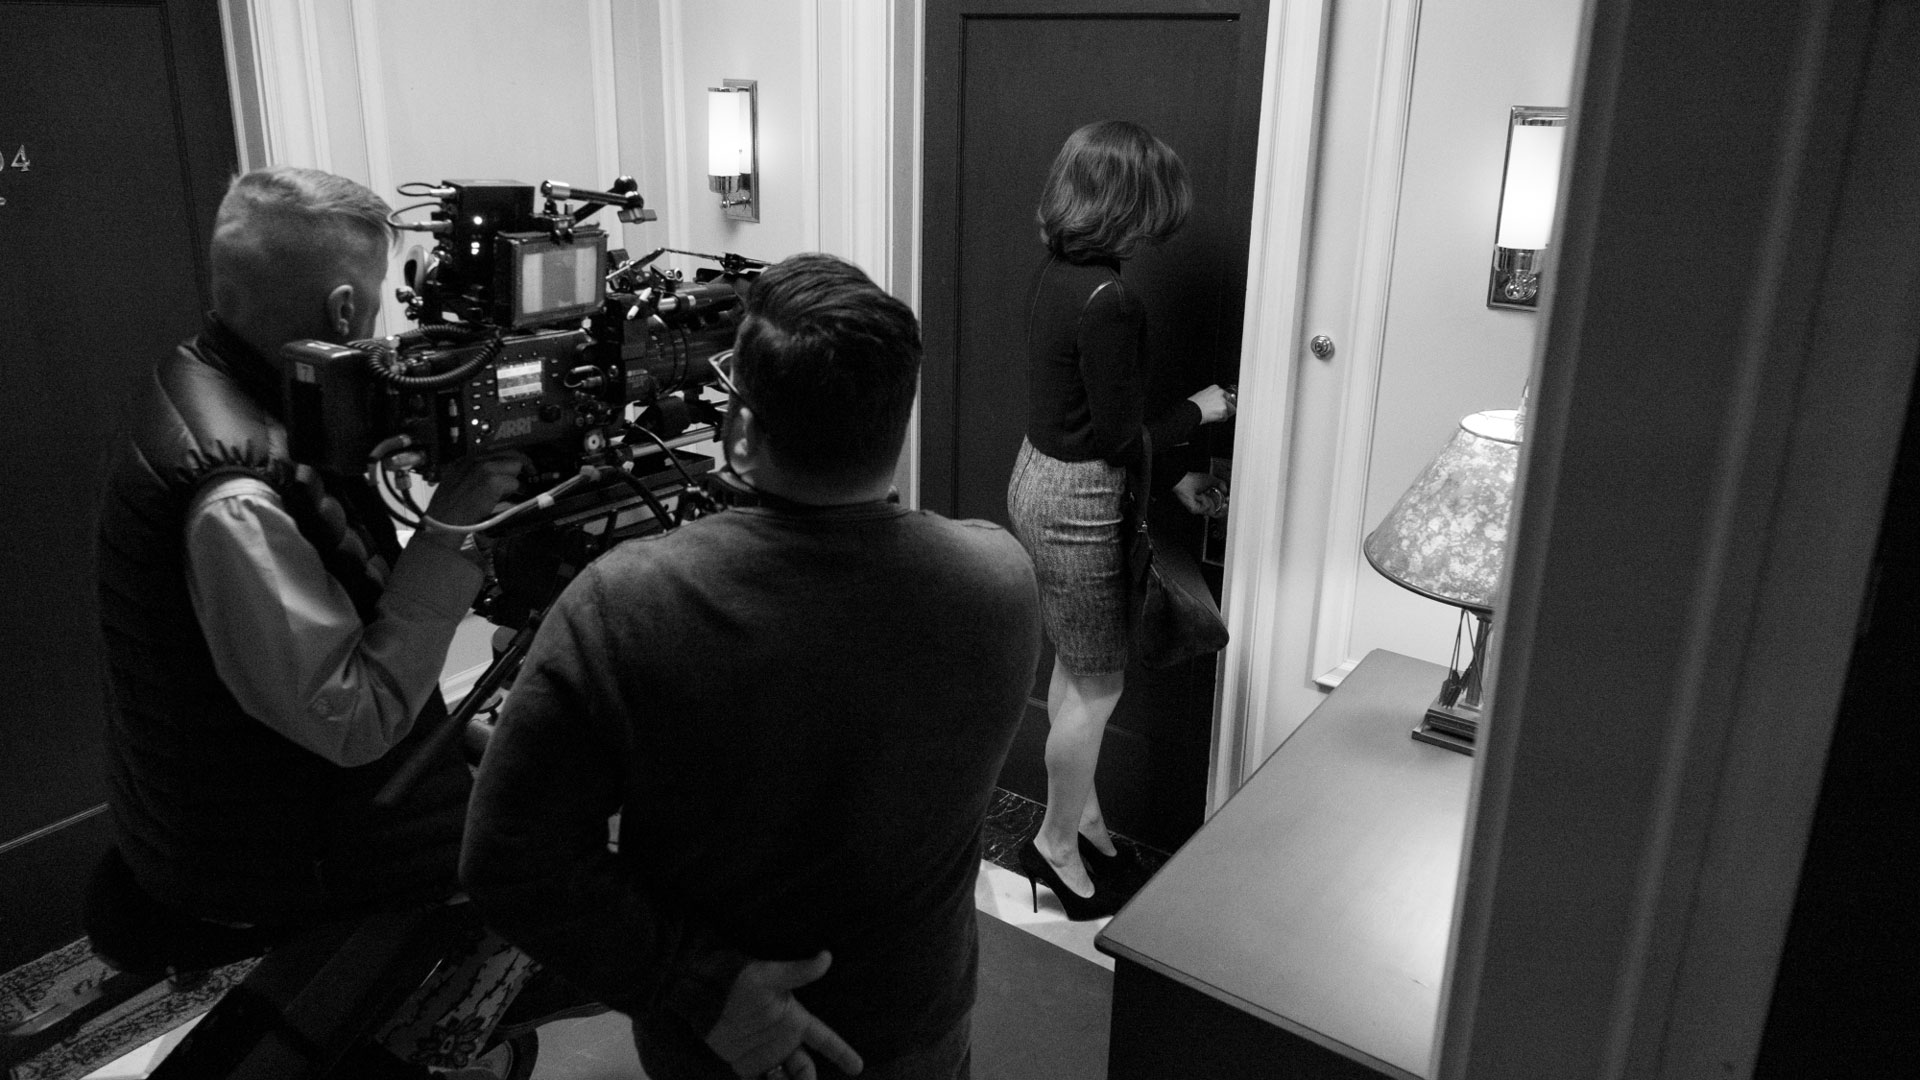 Robert King directs as Julianna Margulies enters Alicia's apartment.